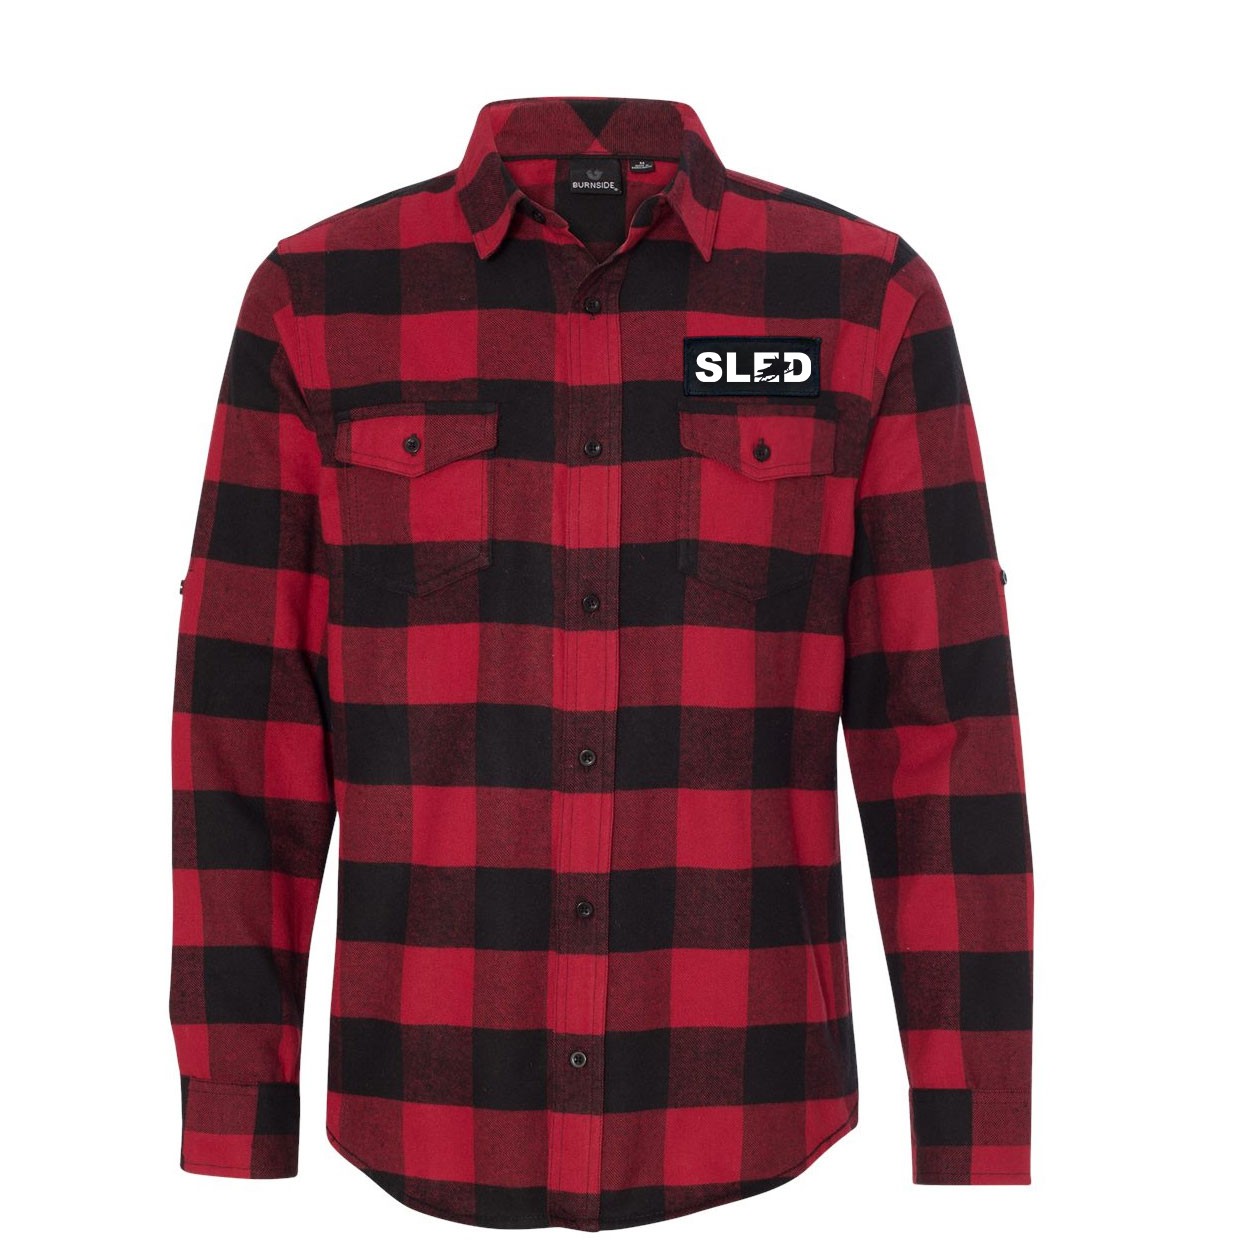 Sled Snowmobile Logo Classic Unisex Long Sleeve Woven Patch Flannel Shirt Red/Black Buffalo (White Logo)